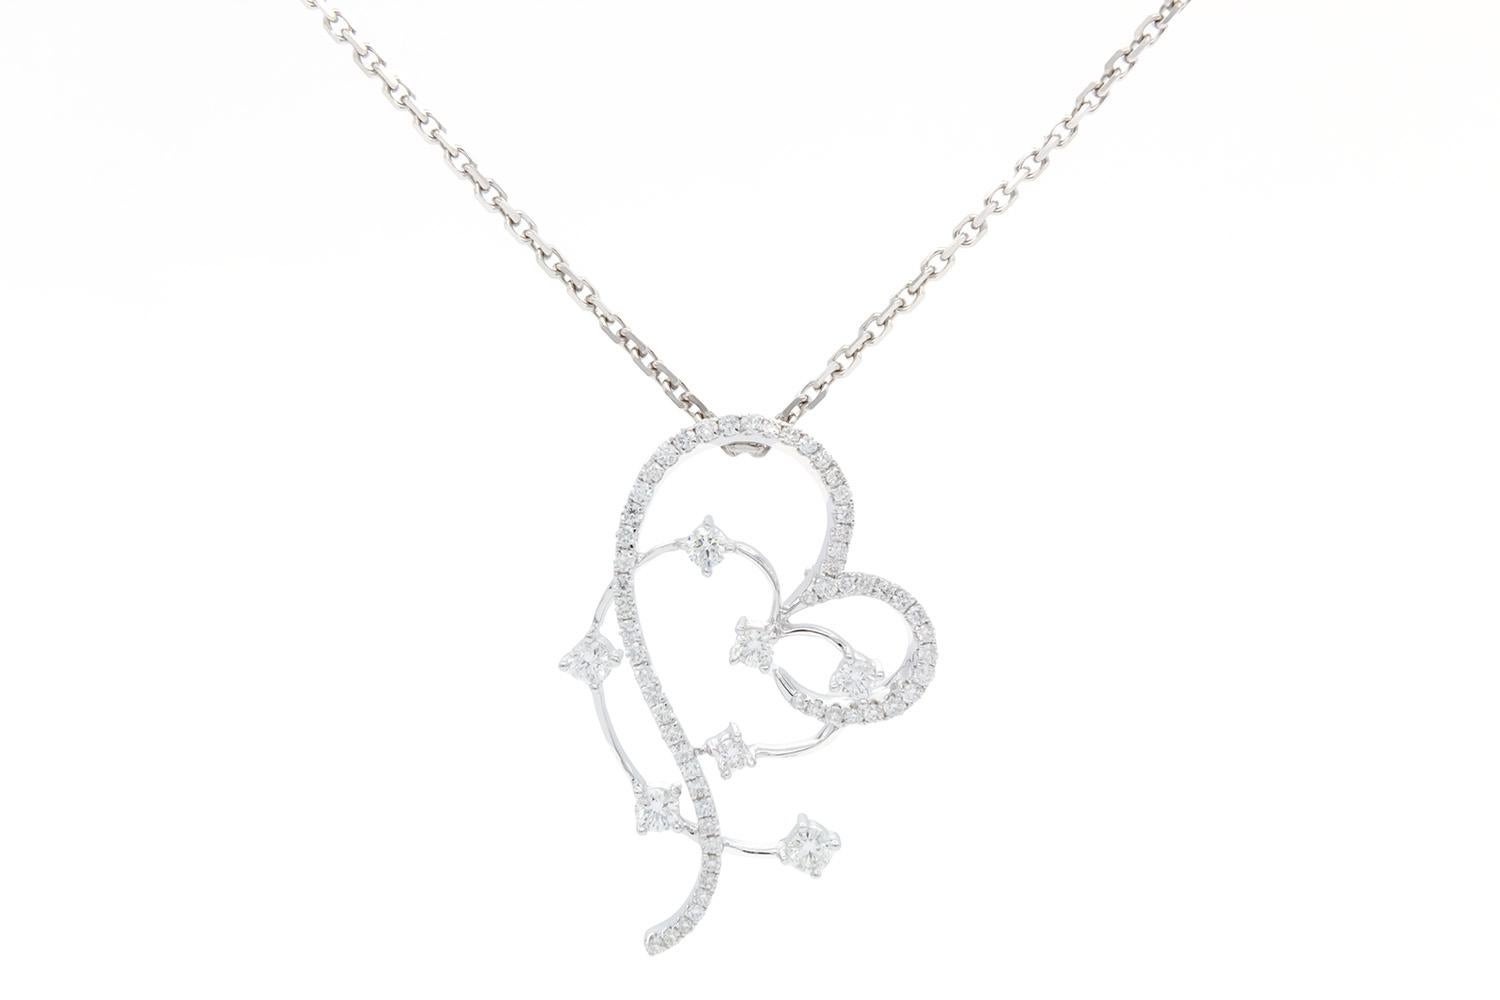 We are pleased to offer this 18k White Gold & Diamond Sweeping Heart Silhouette Pendant Necklace. A timeless pendant crafted from dazzling round diamonds, celebrating the exquisite silhouette of your love. This is stunning 18k white gold pendant is